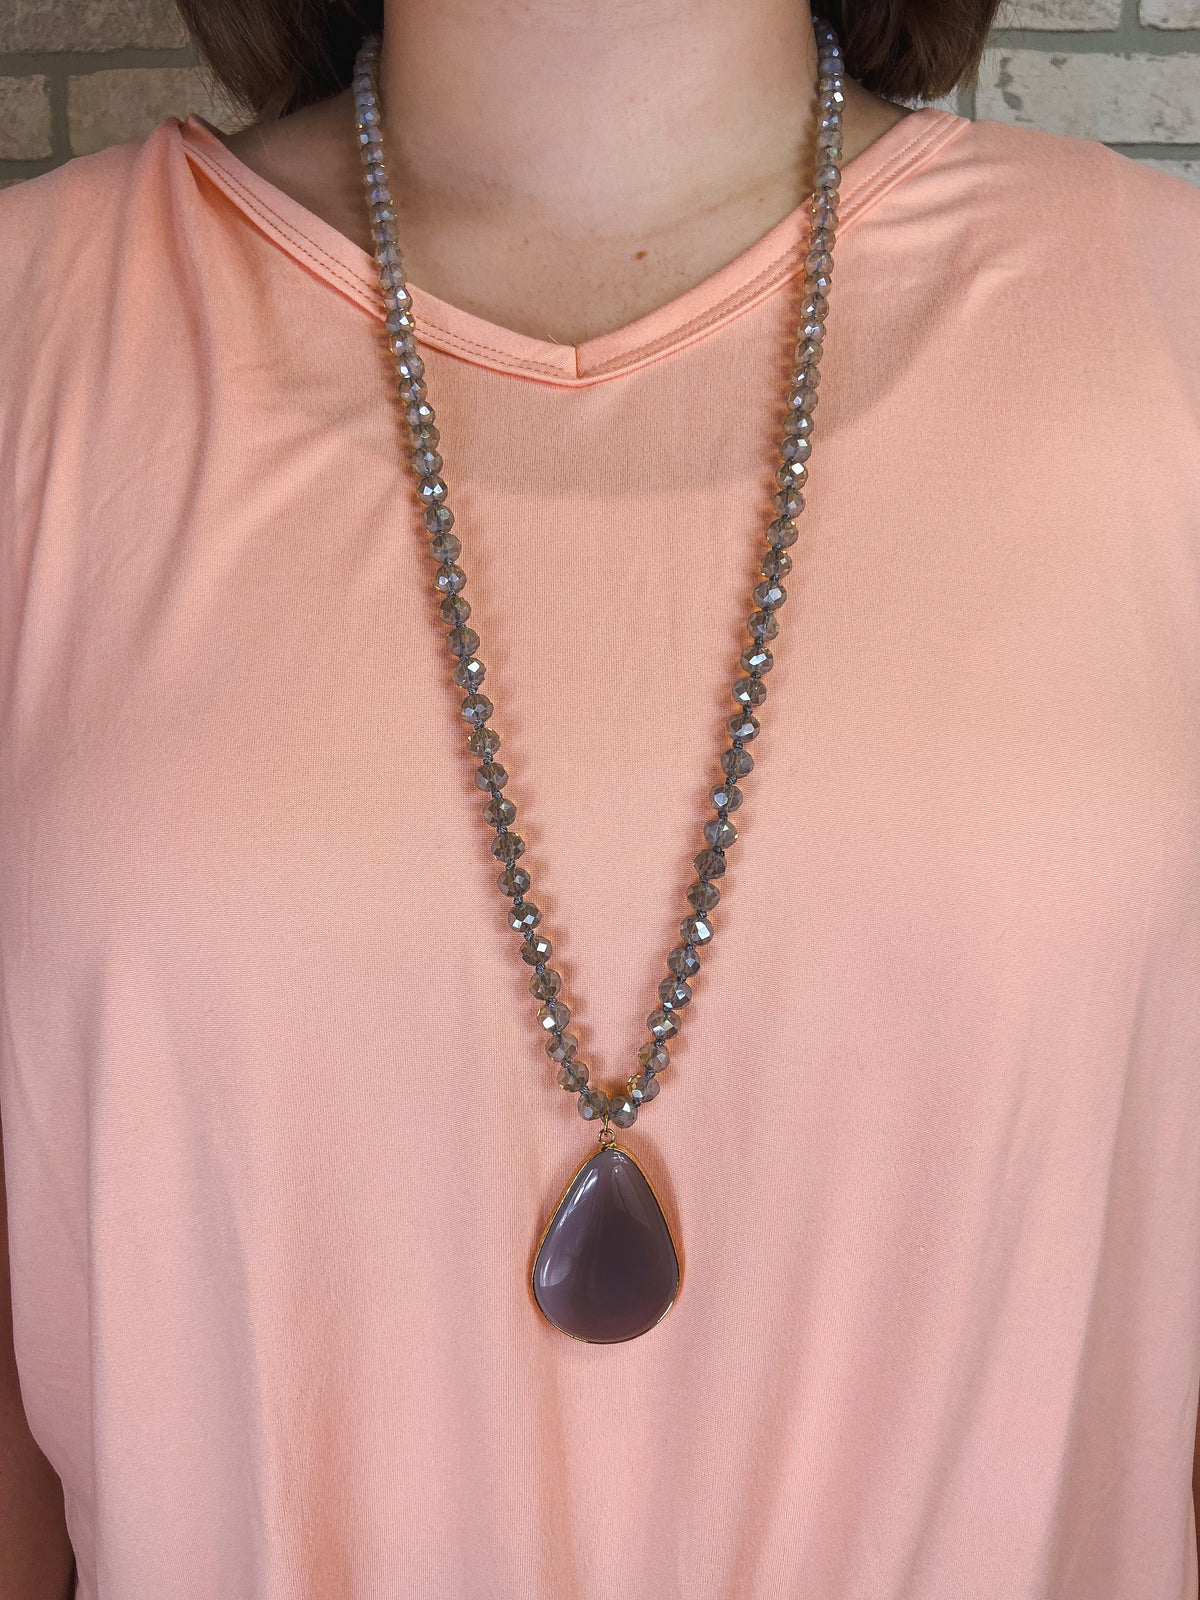 Gray Crystal Bead Necklace with Glass Stone